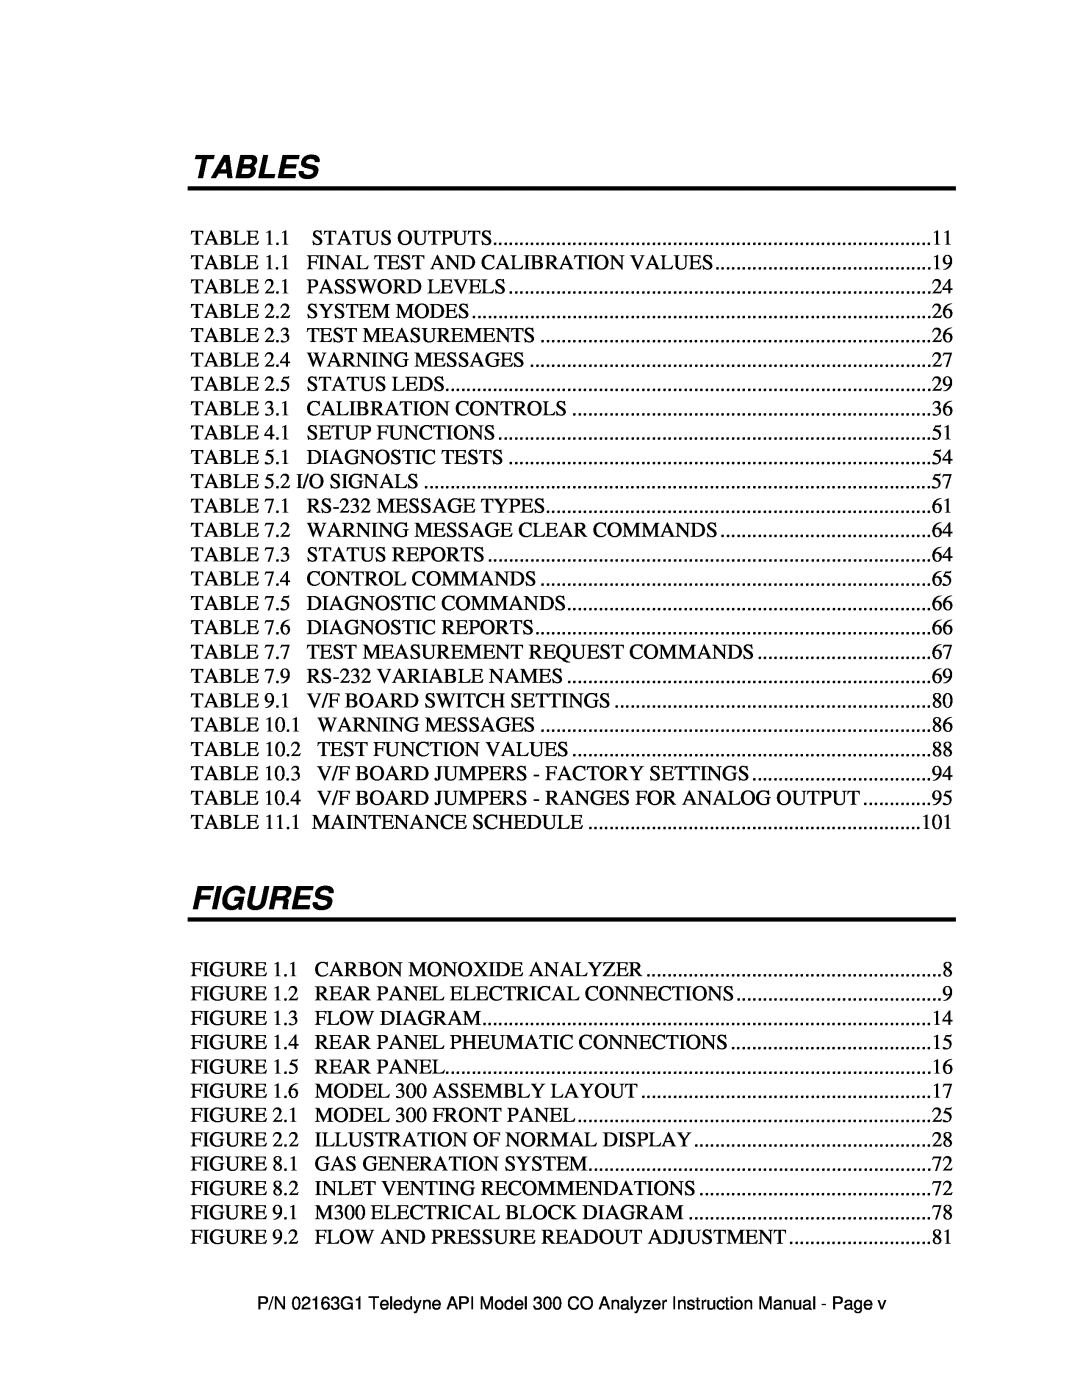 Teledyne 300 instruction manual Tables, Figures 